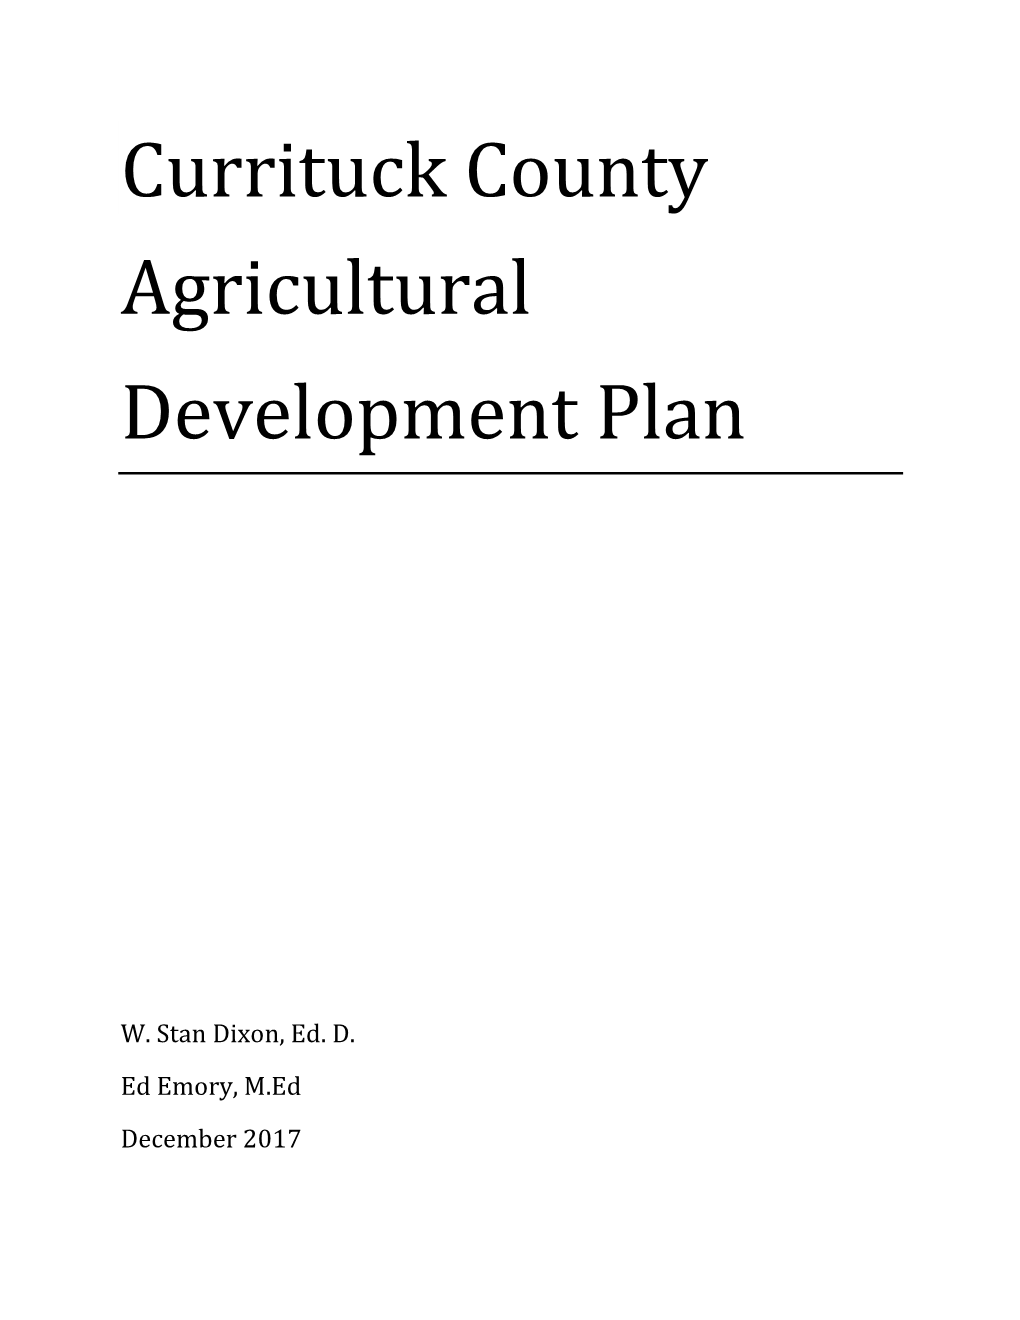 Currituck County Agricultural Development Plan